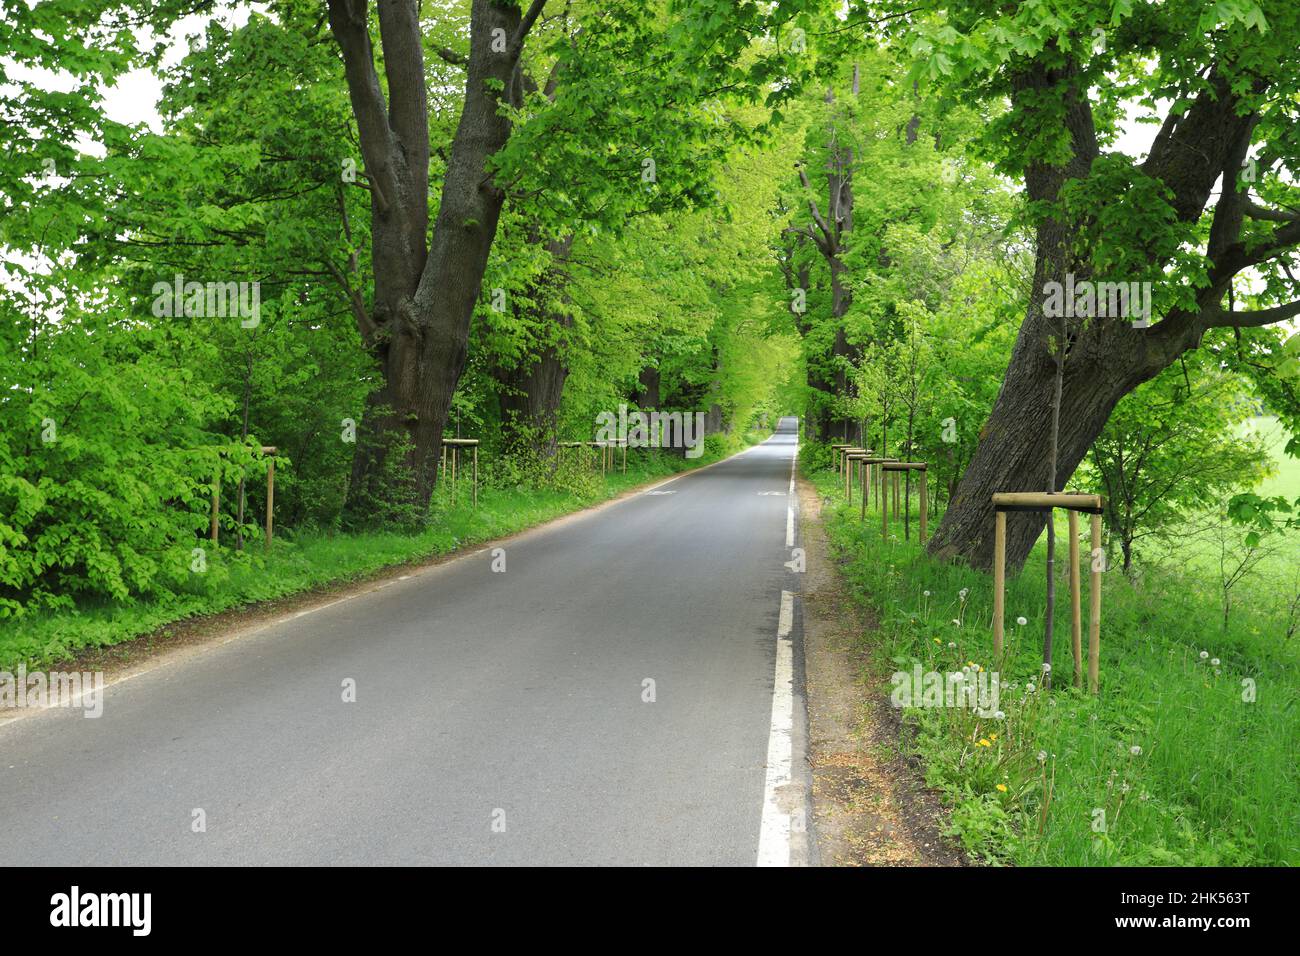 Rural road with avenue of linden trees in the summer season Stock Photo